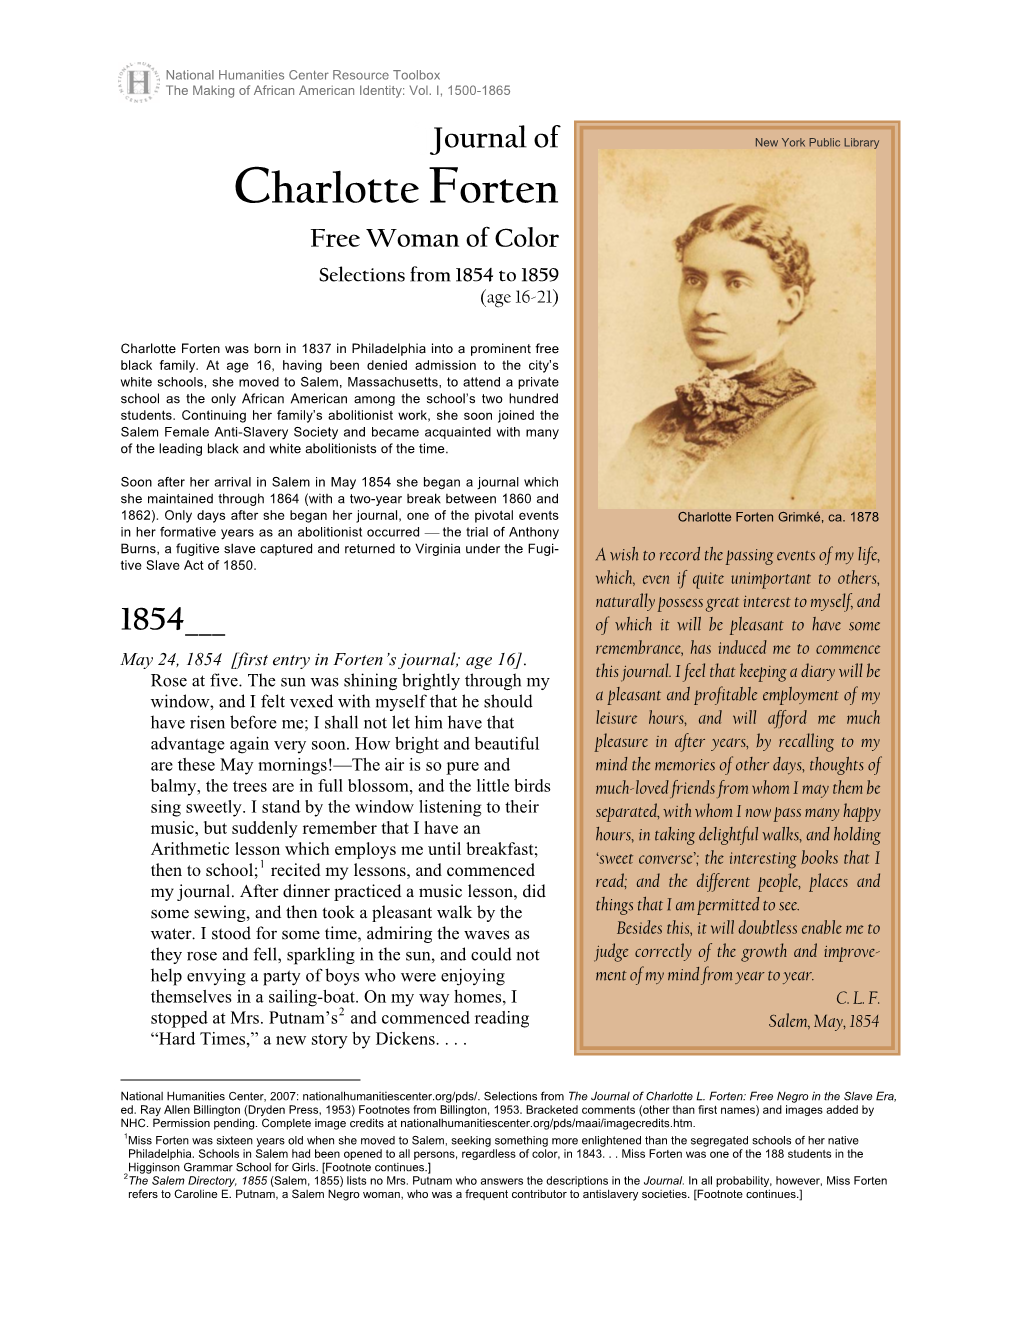 Journal of Charlotte Forten, Selections: 1854-1859